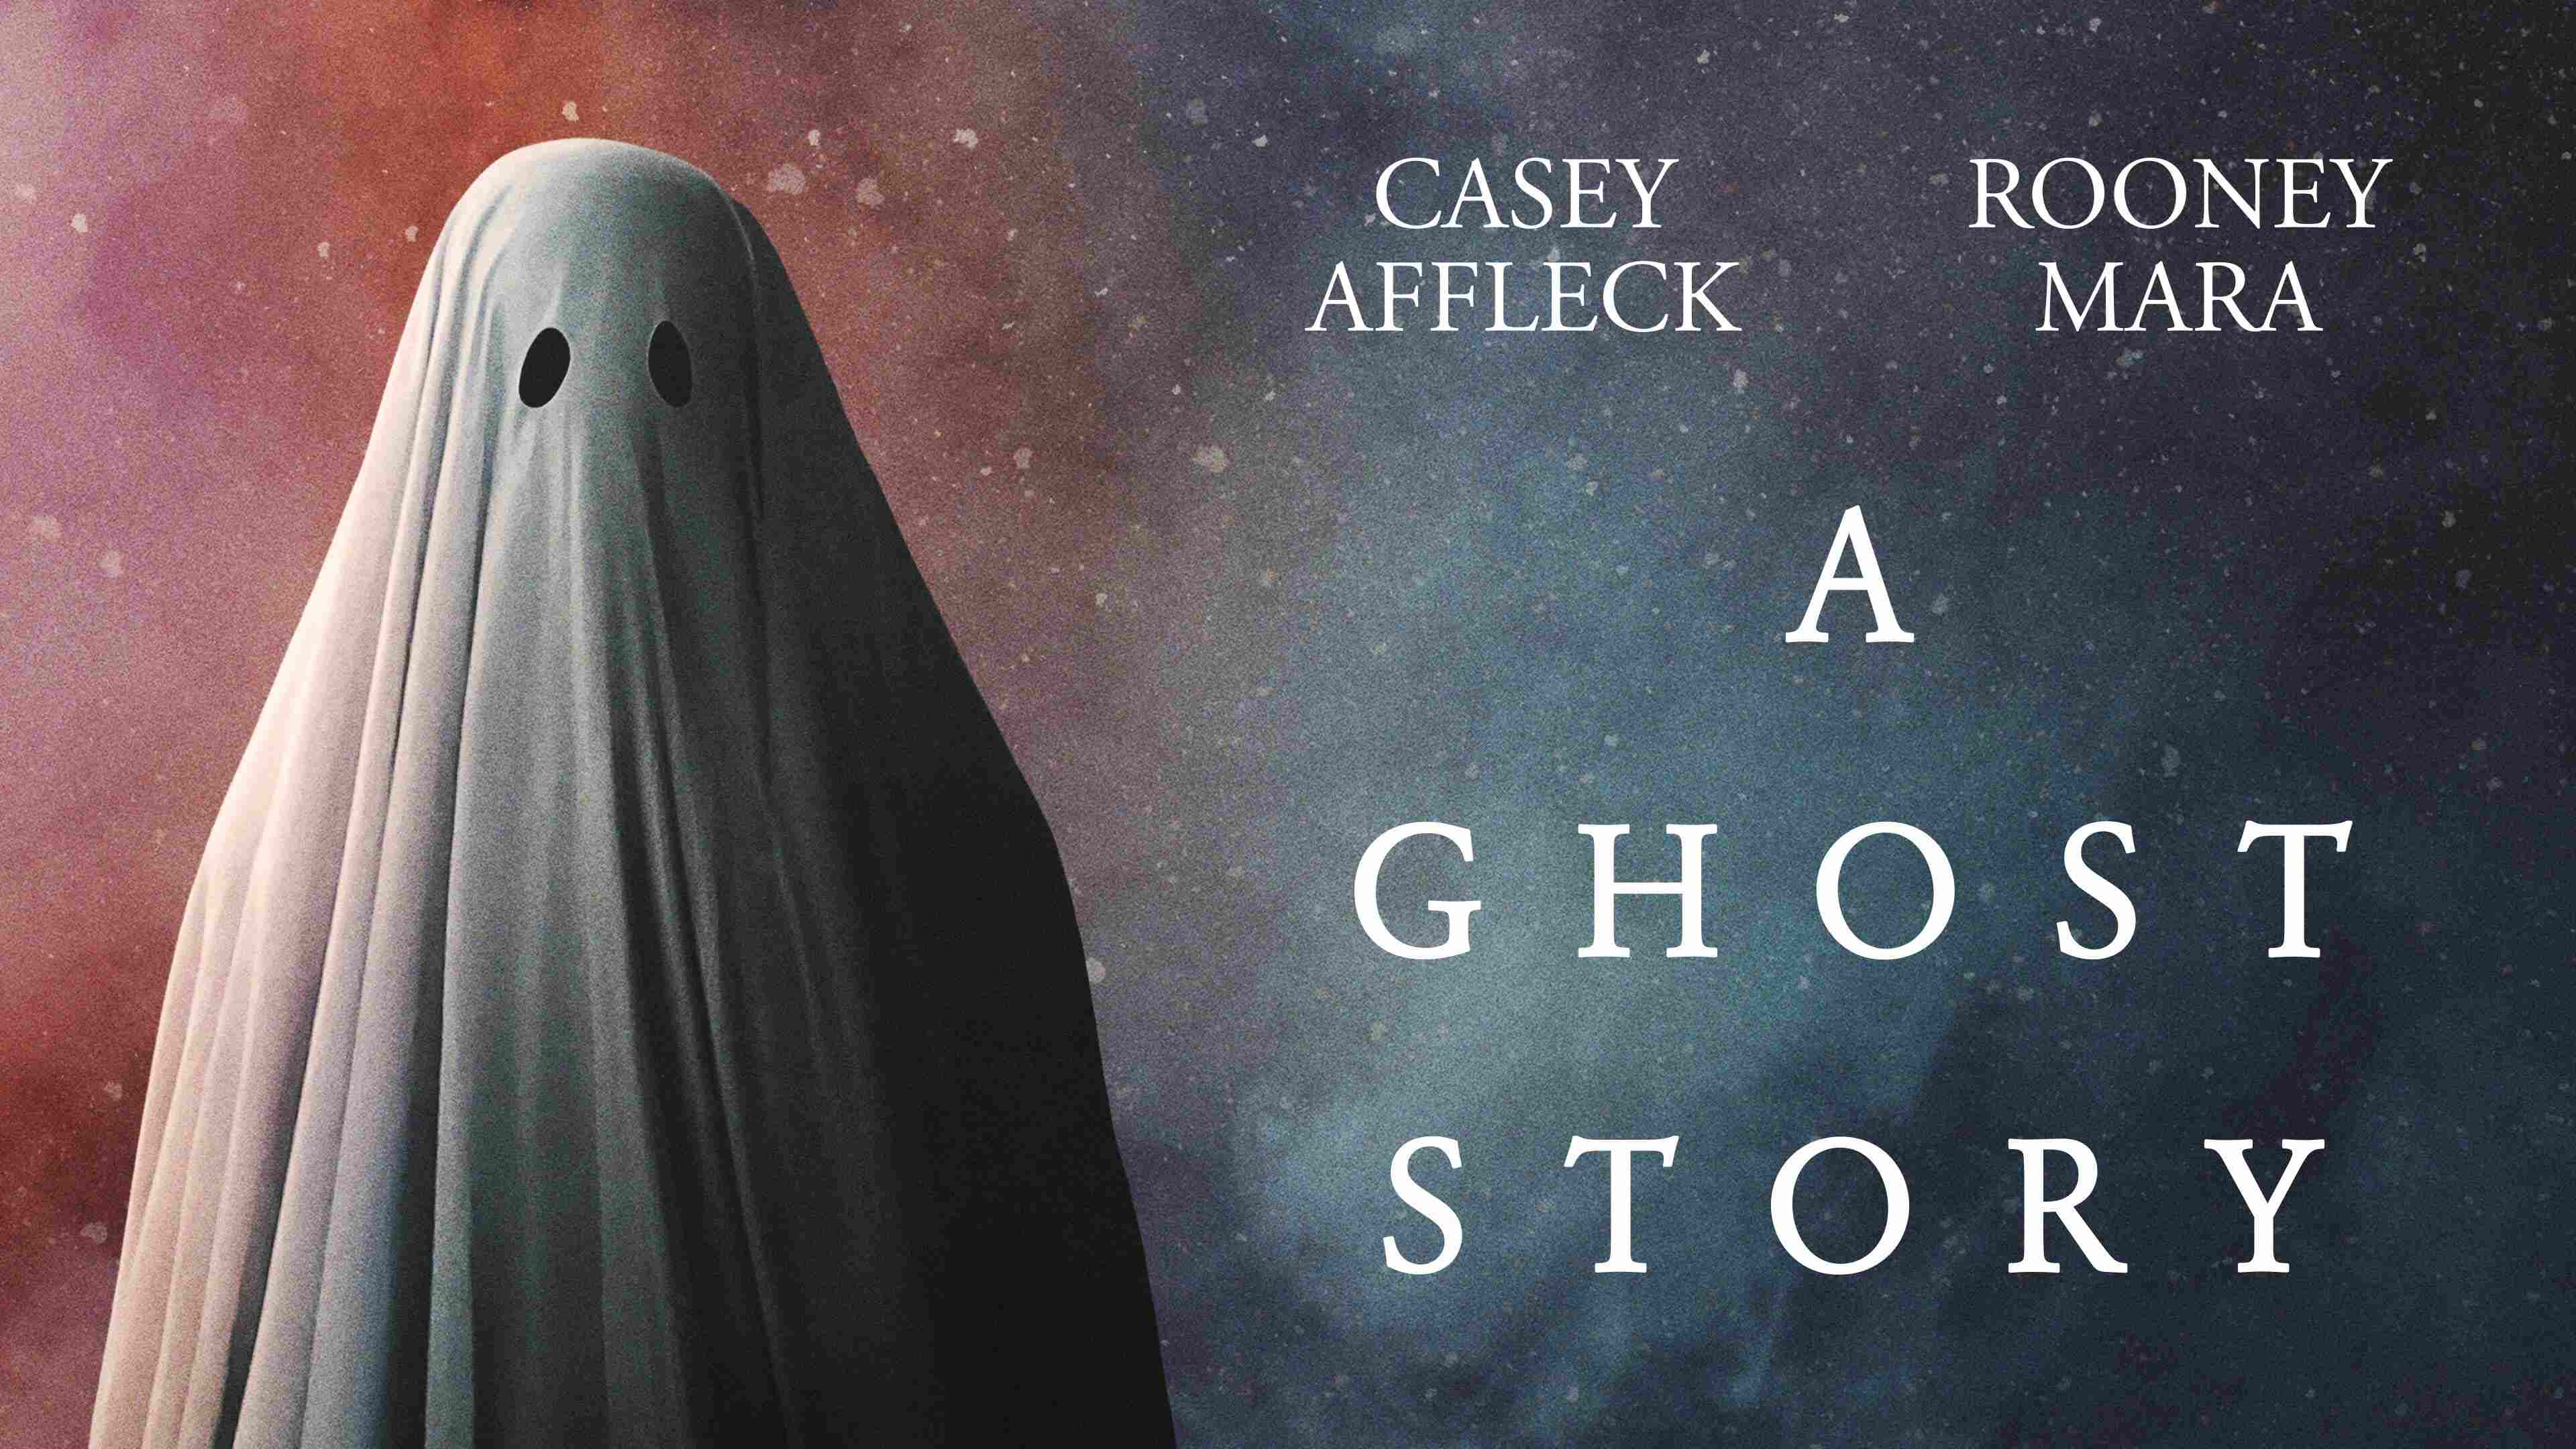 47-facts-about-the-movie-ghost-story